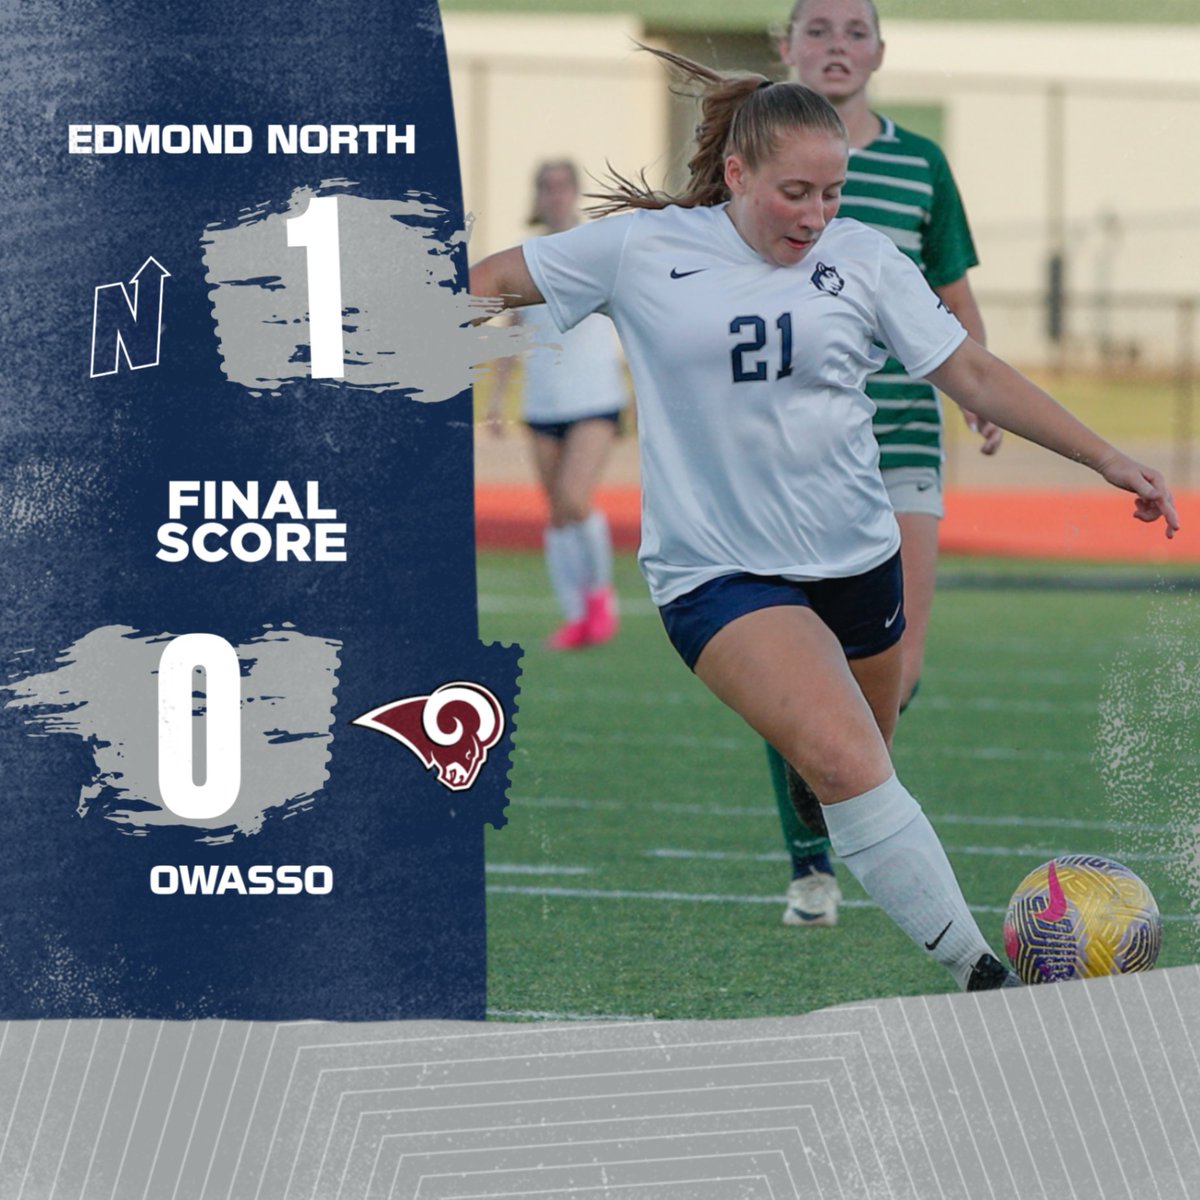 Edmond North Girls Soccer beats Owasso in overtime on Friday night to advance to the State Semifinals! They will host Deer Creek on Tuesday at 7:00 at Husky Stadium! #HuskyNation #uN1ty @enhs.girls.soccer @ENGirlsSoccer